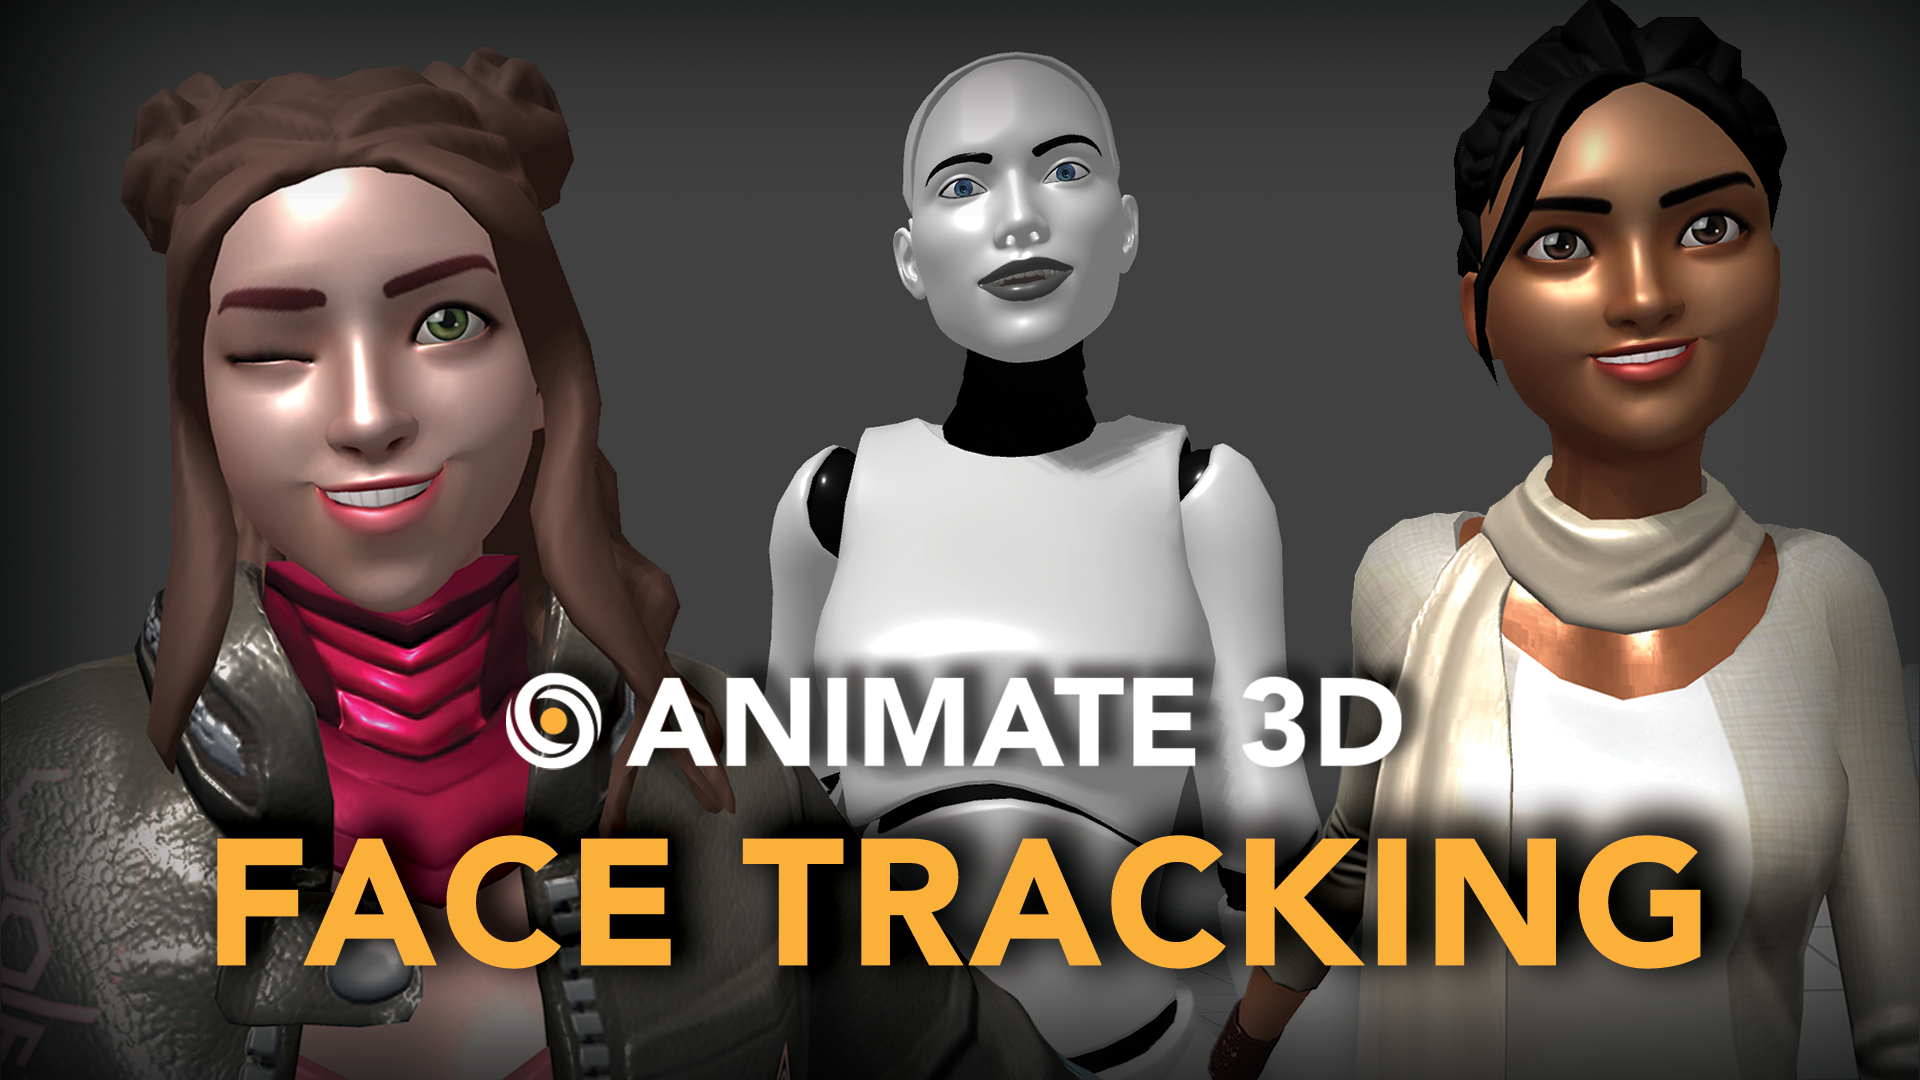 Animate 3D: Face Tracking is Here!